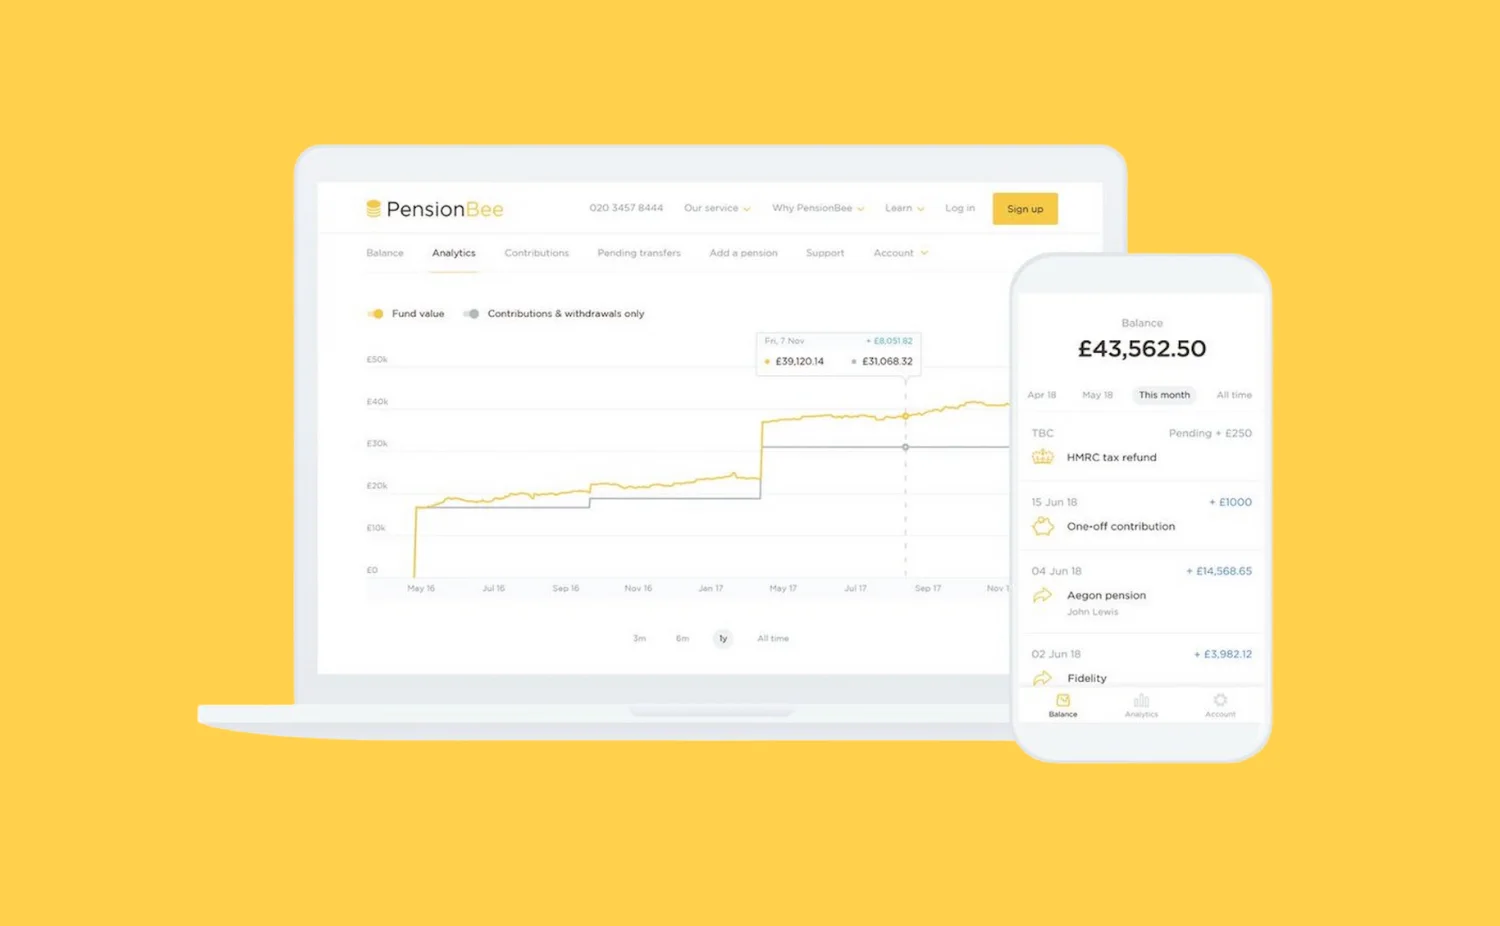 Combine your old pensions with PensionBee.